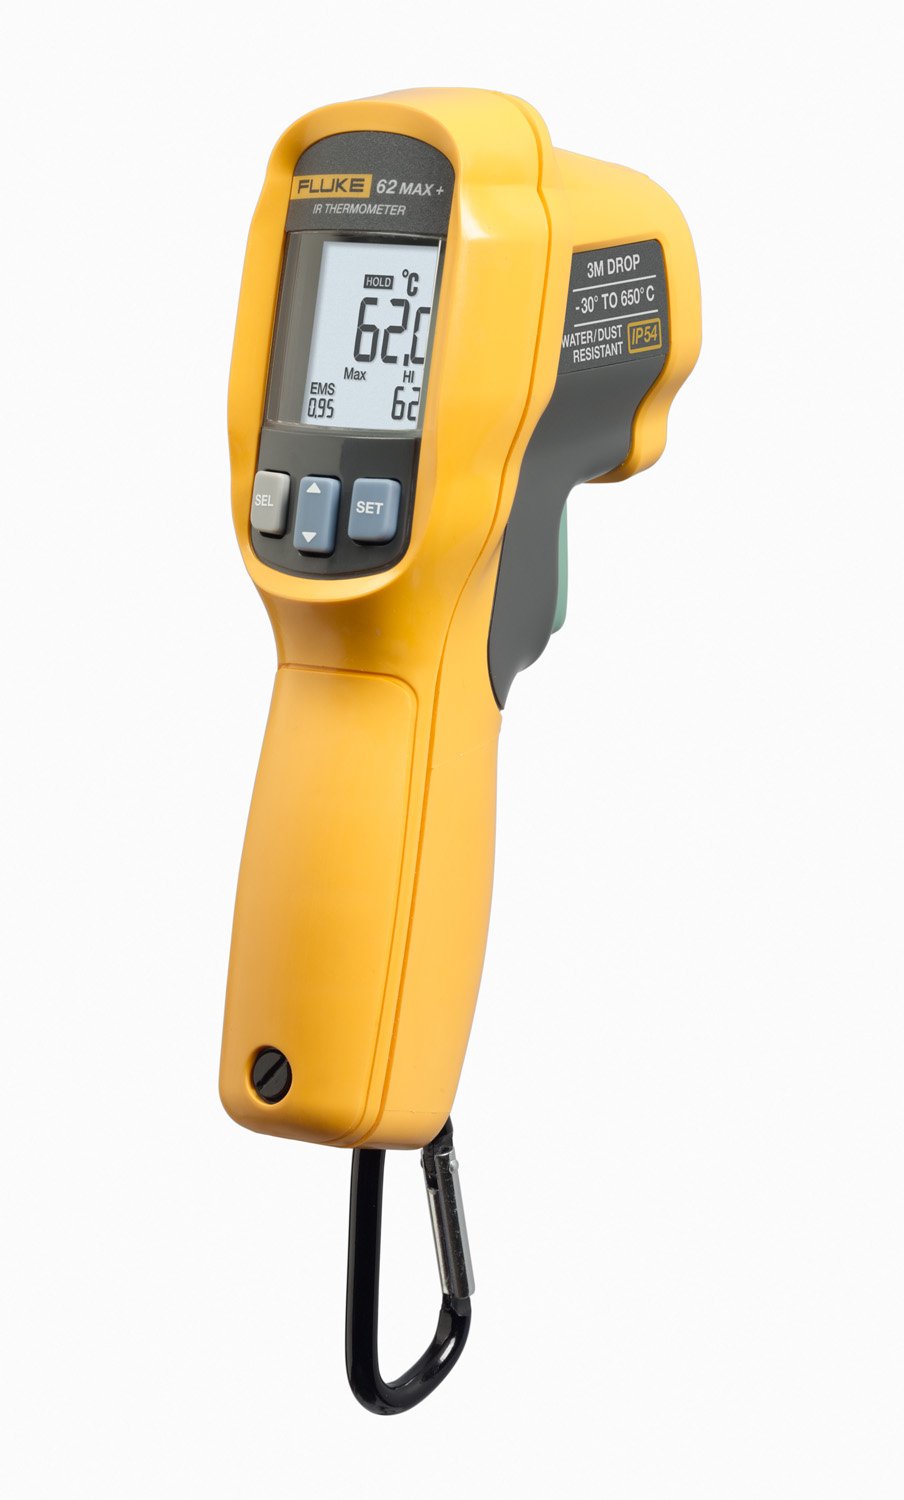 Fluke 62 Max+ Infrared Thermometer (Not for human temp)...